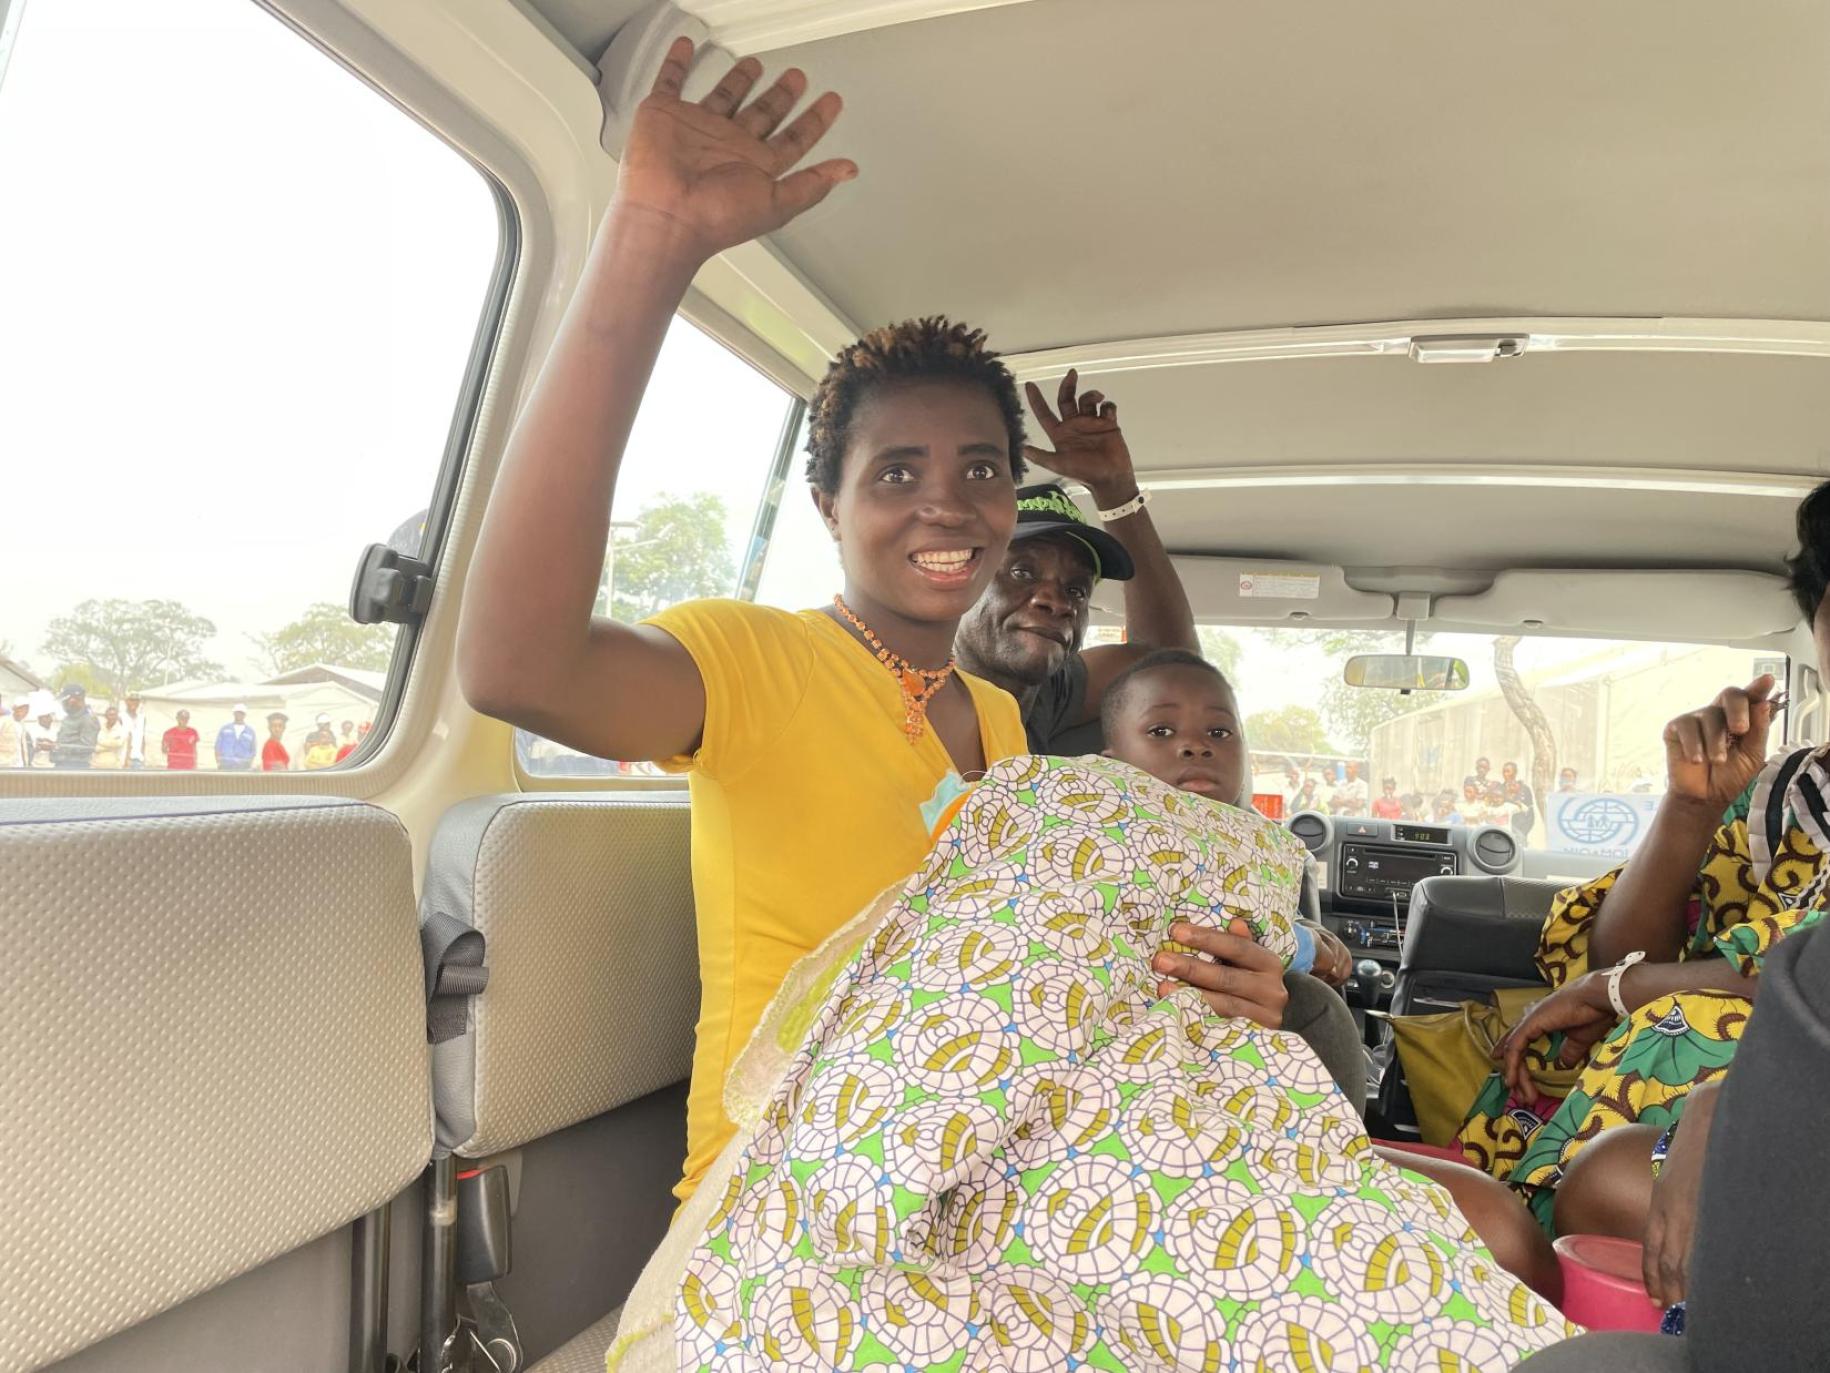 In Angola, a Congolese woman with short hair and wearing a yellow short-sleeved top sits in a vehicle with other poeple, a baby wrapped in a blanket on her knees, and waves goodbye with her right hand and smiling.